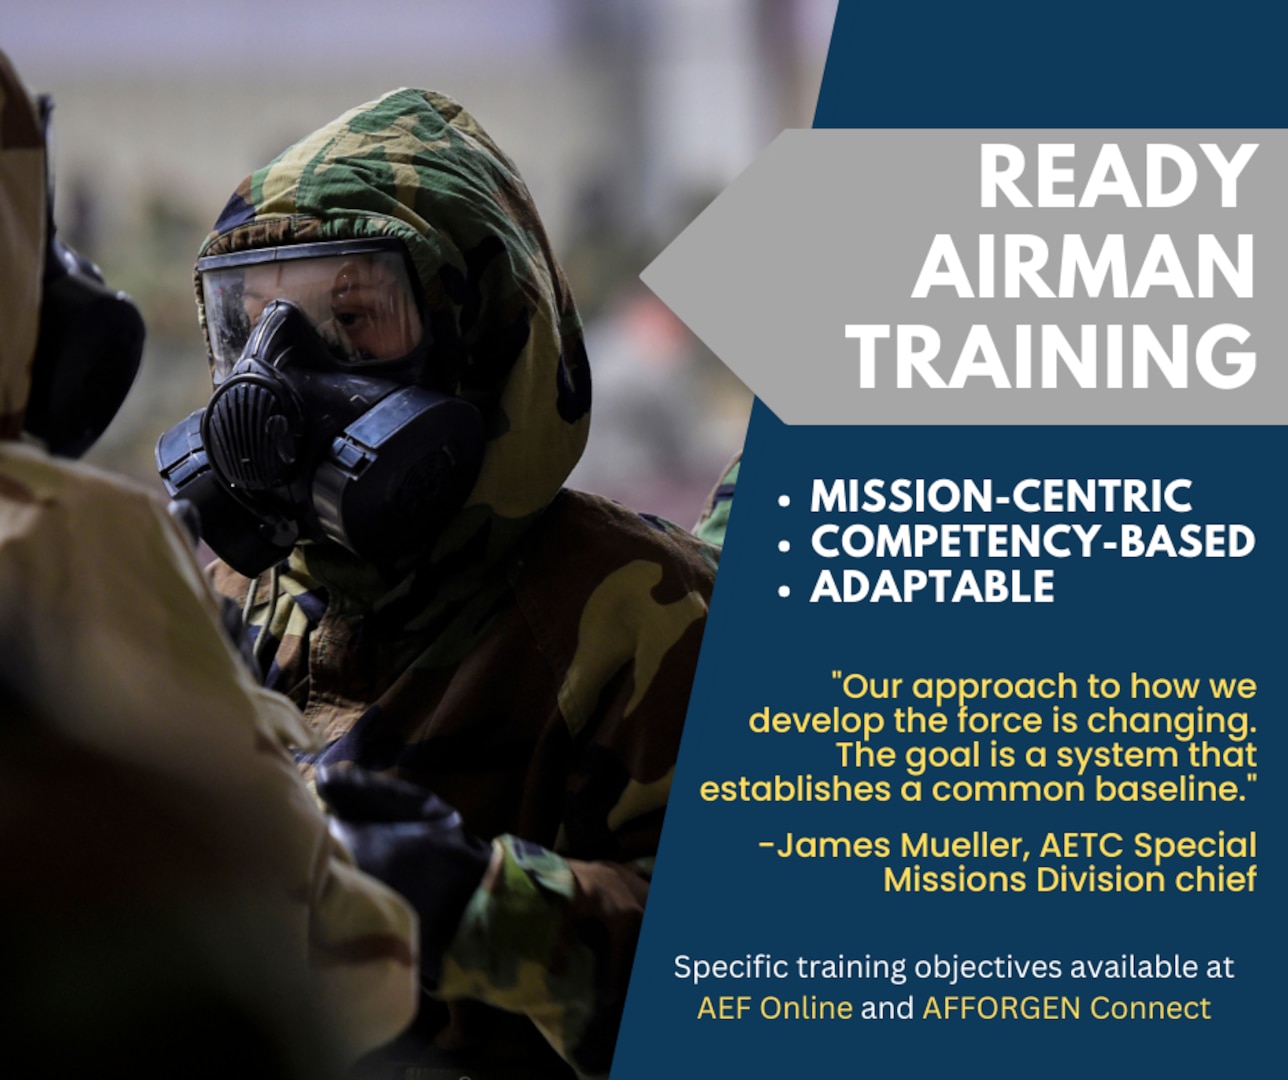 U.S. Air Force graphic for Ready Airman Training with a photo and text. RAT is designed to train Airmen undergoing the reset, prepare and ready phases of AFFORGEN and has been shaped through efforts of Air Education and Training Command experts during 2022.